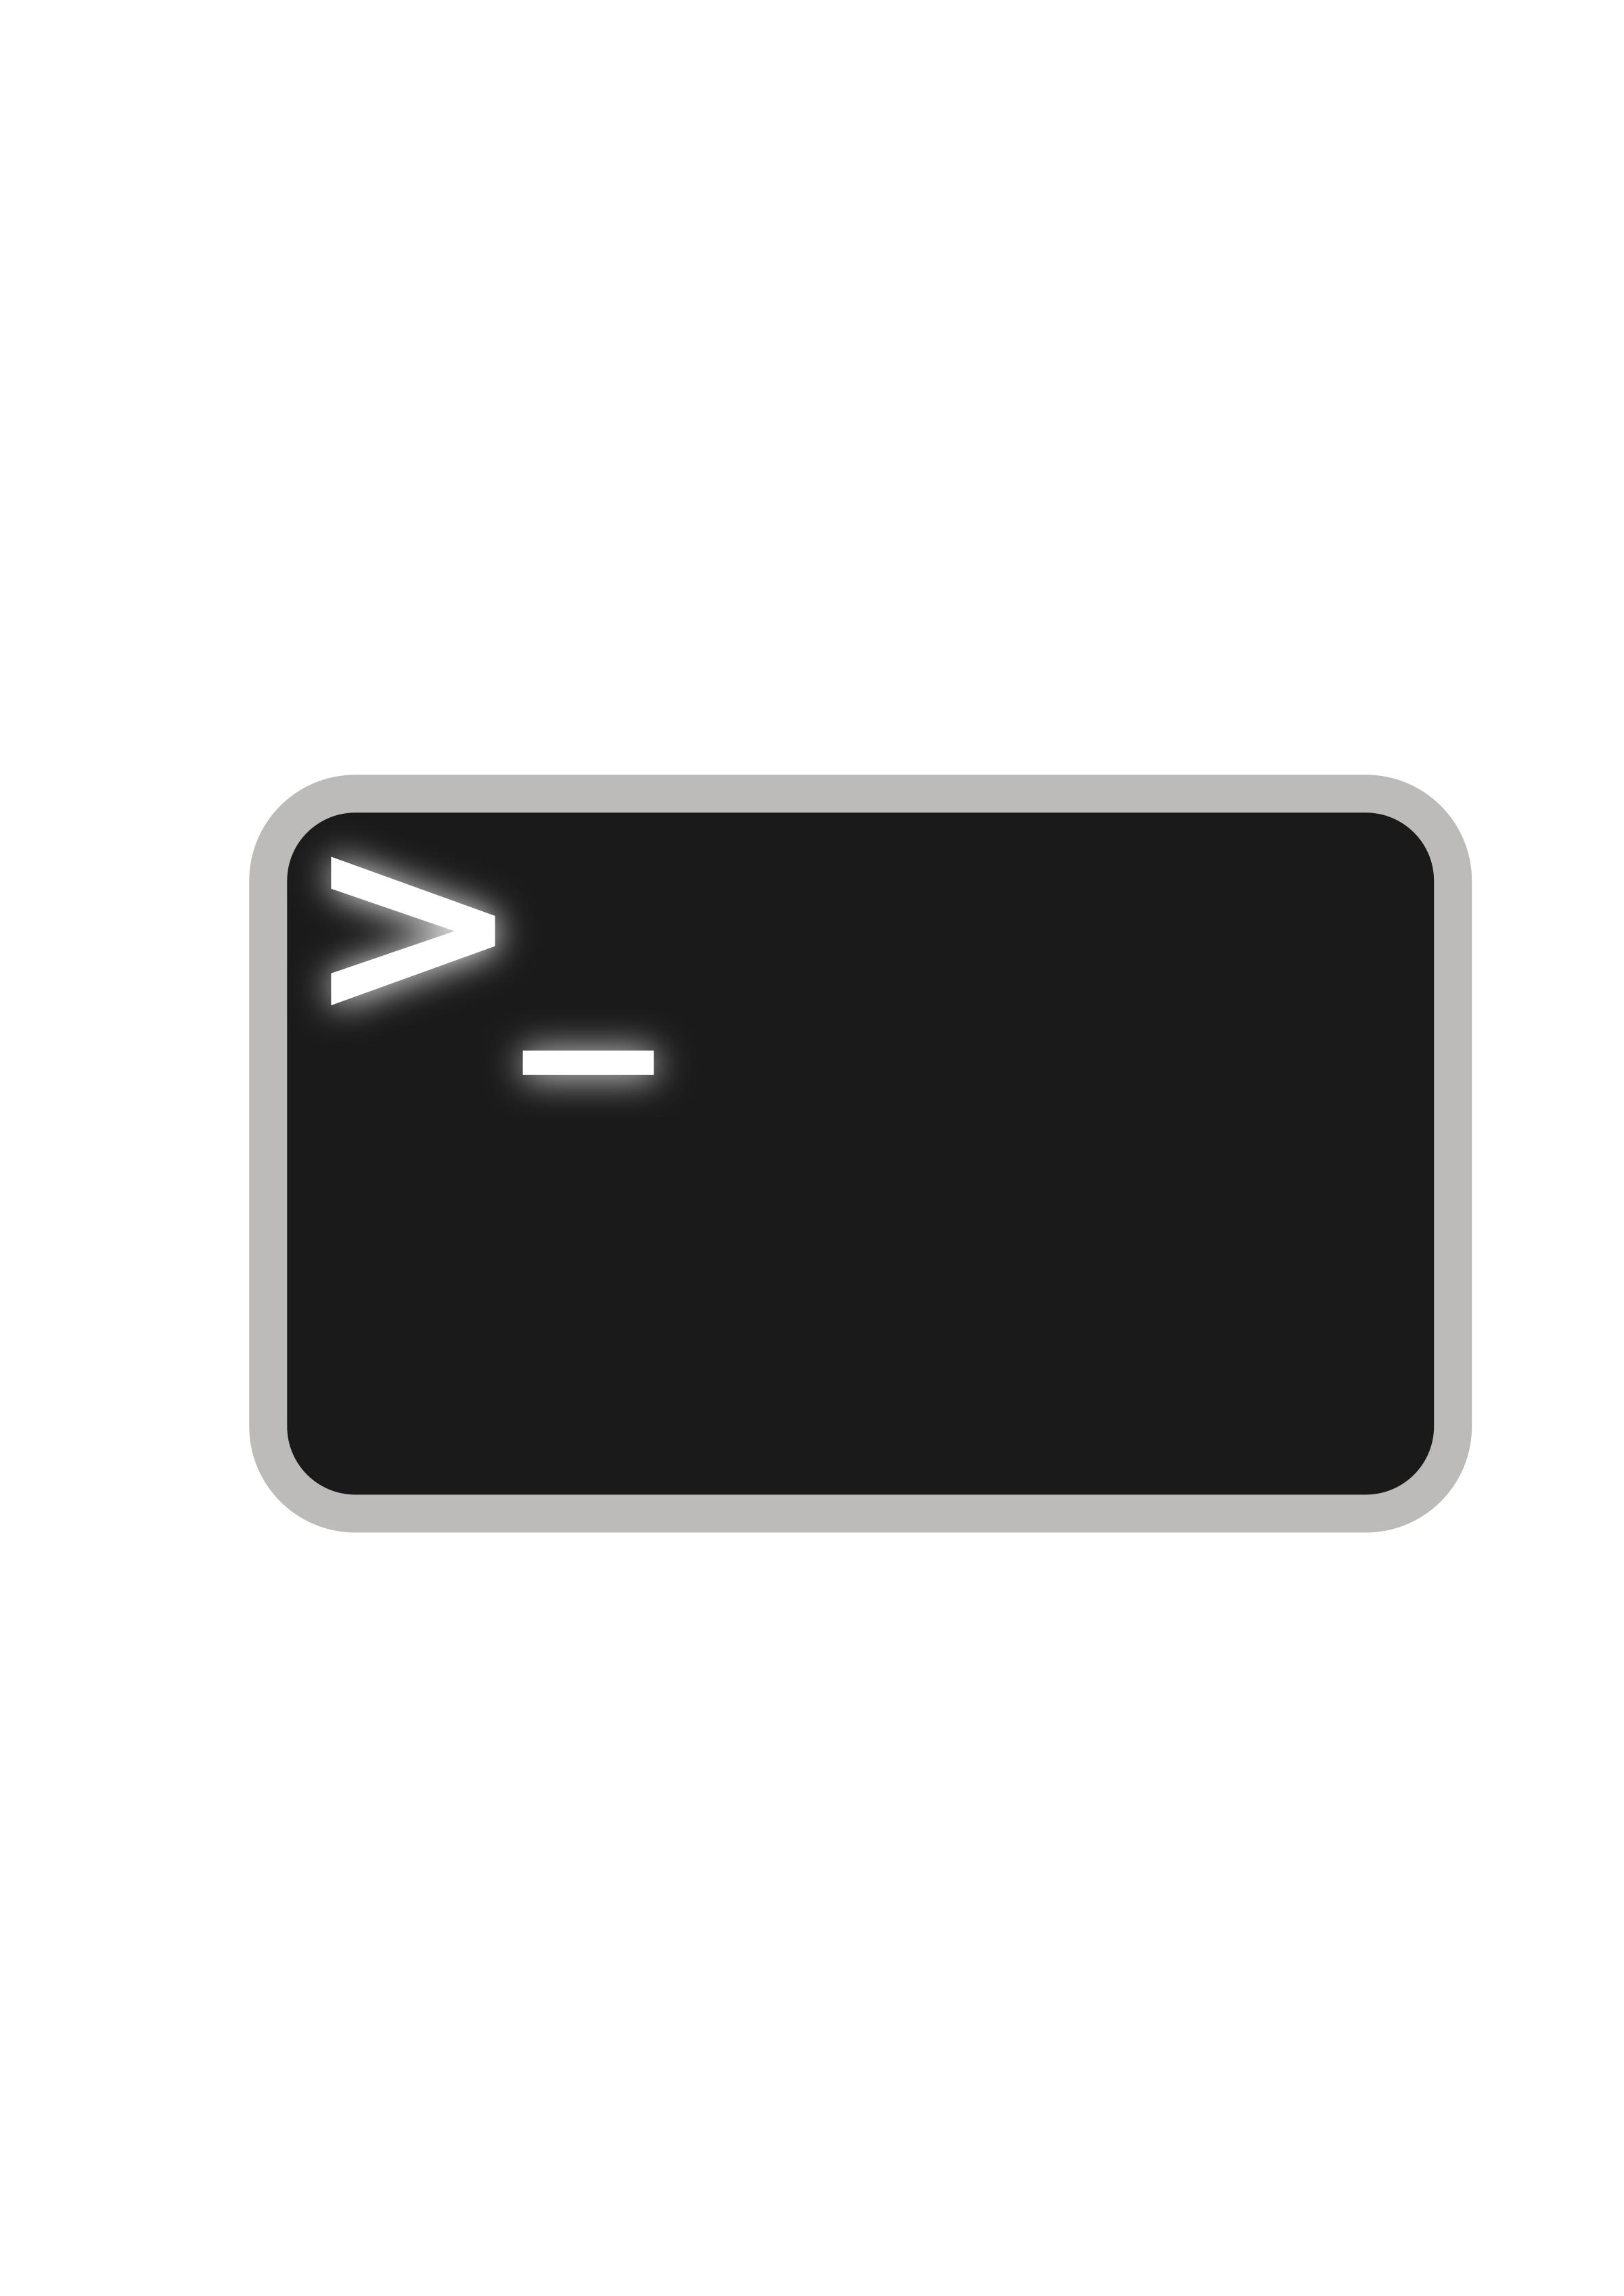 Command line png